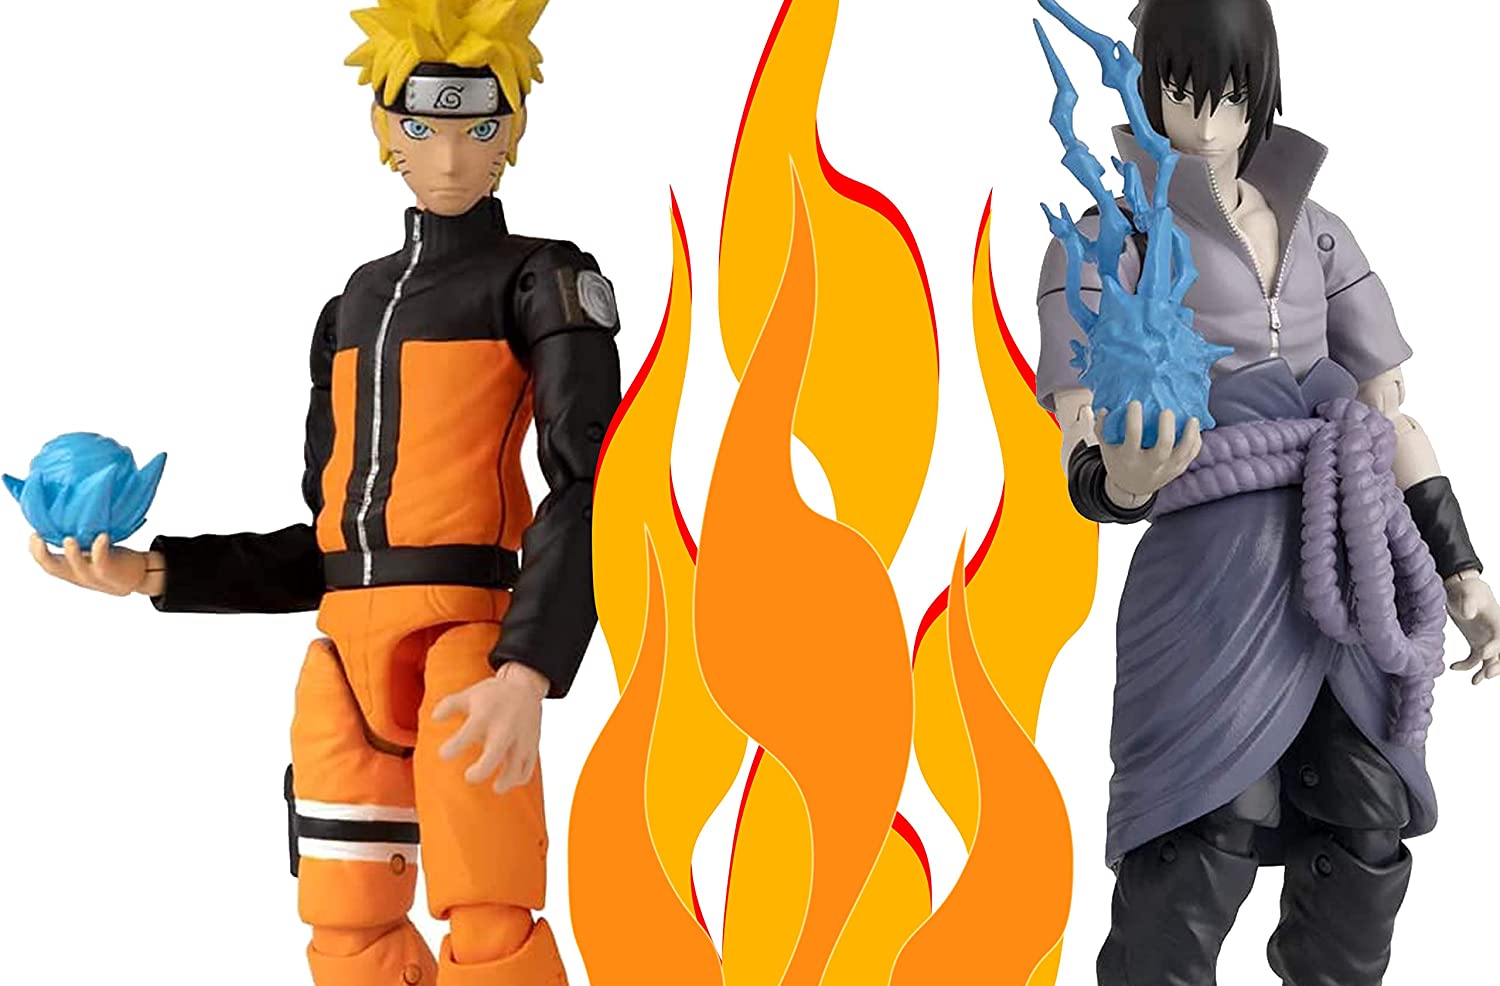 Bandai Anime Heroes Naruto - Naruto Uzumaki 6.5-in Action Figure with  Accessory Pack